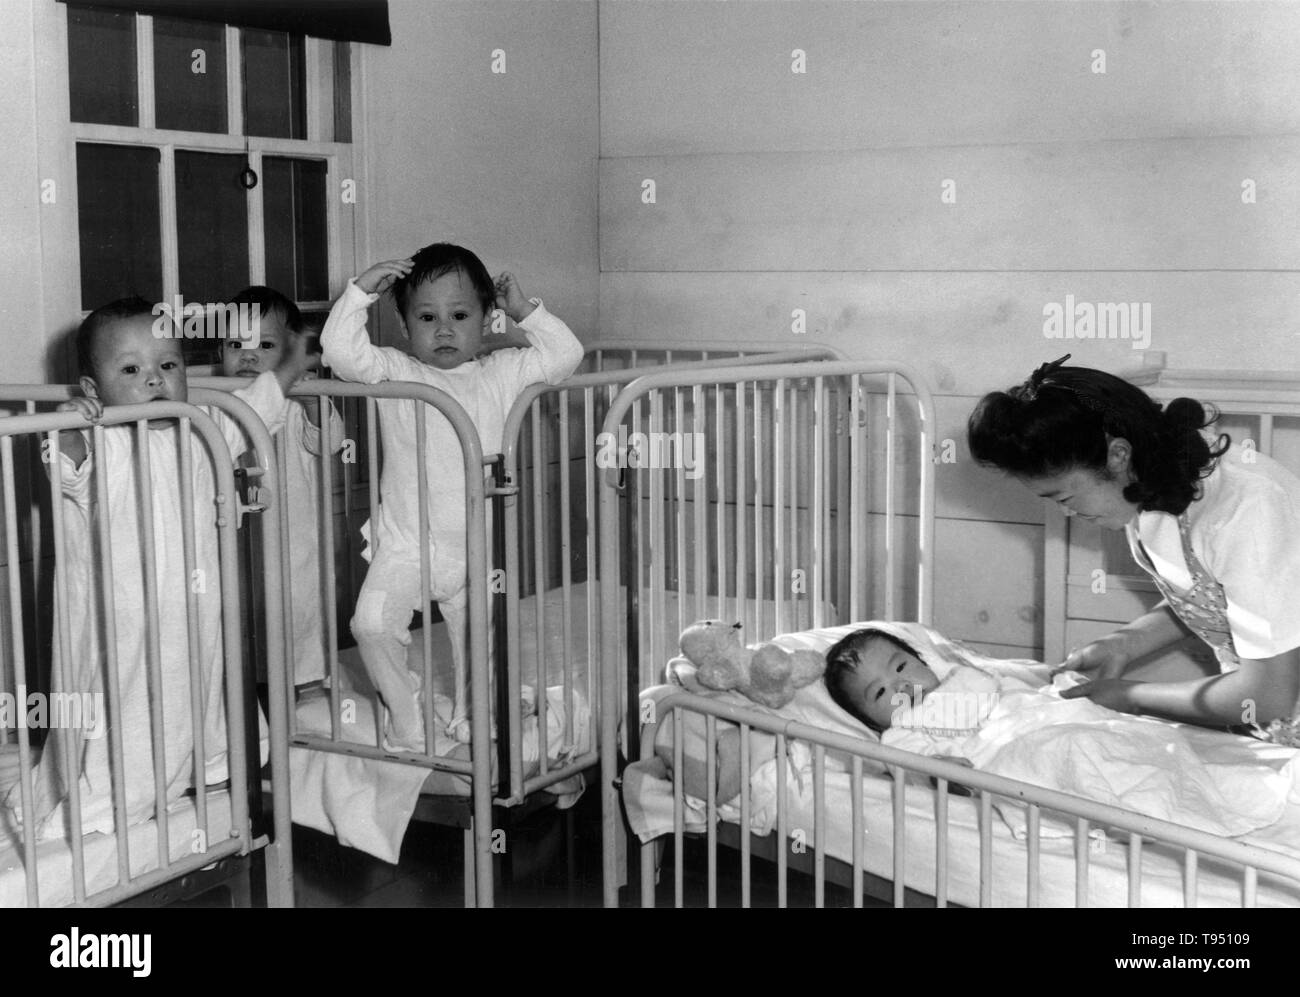 Entitled: 'Nursery, orphan infants, Manzanar Relocation Center, California.' The internment of Japanese-Americans during WWII was the forced relocation and incarceration in camps of 110,000-120,000 people of Japanese ancestry (62% of the internees were US citizens) ordered by President Roosevelt shortly after Japan's attack on Pearl Harbor. Japanese-Americans were incarcerated based on local population concentrations and regional politics. Stock Photo